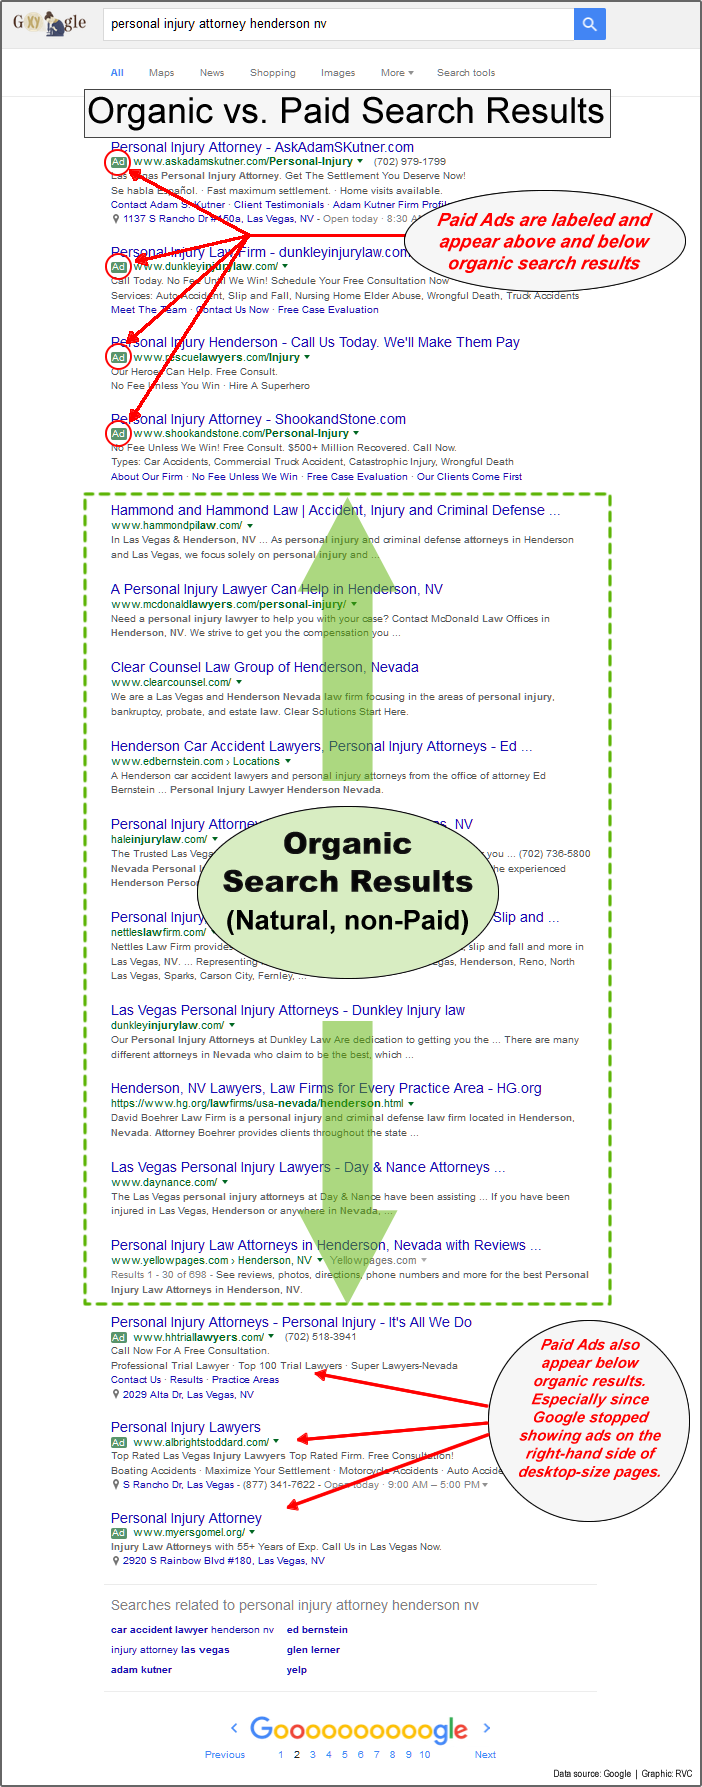 Organic vs paid search results